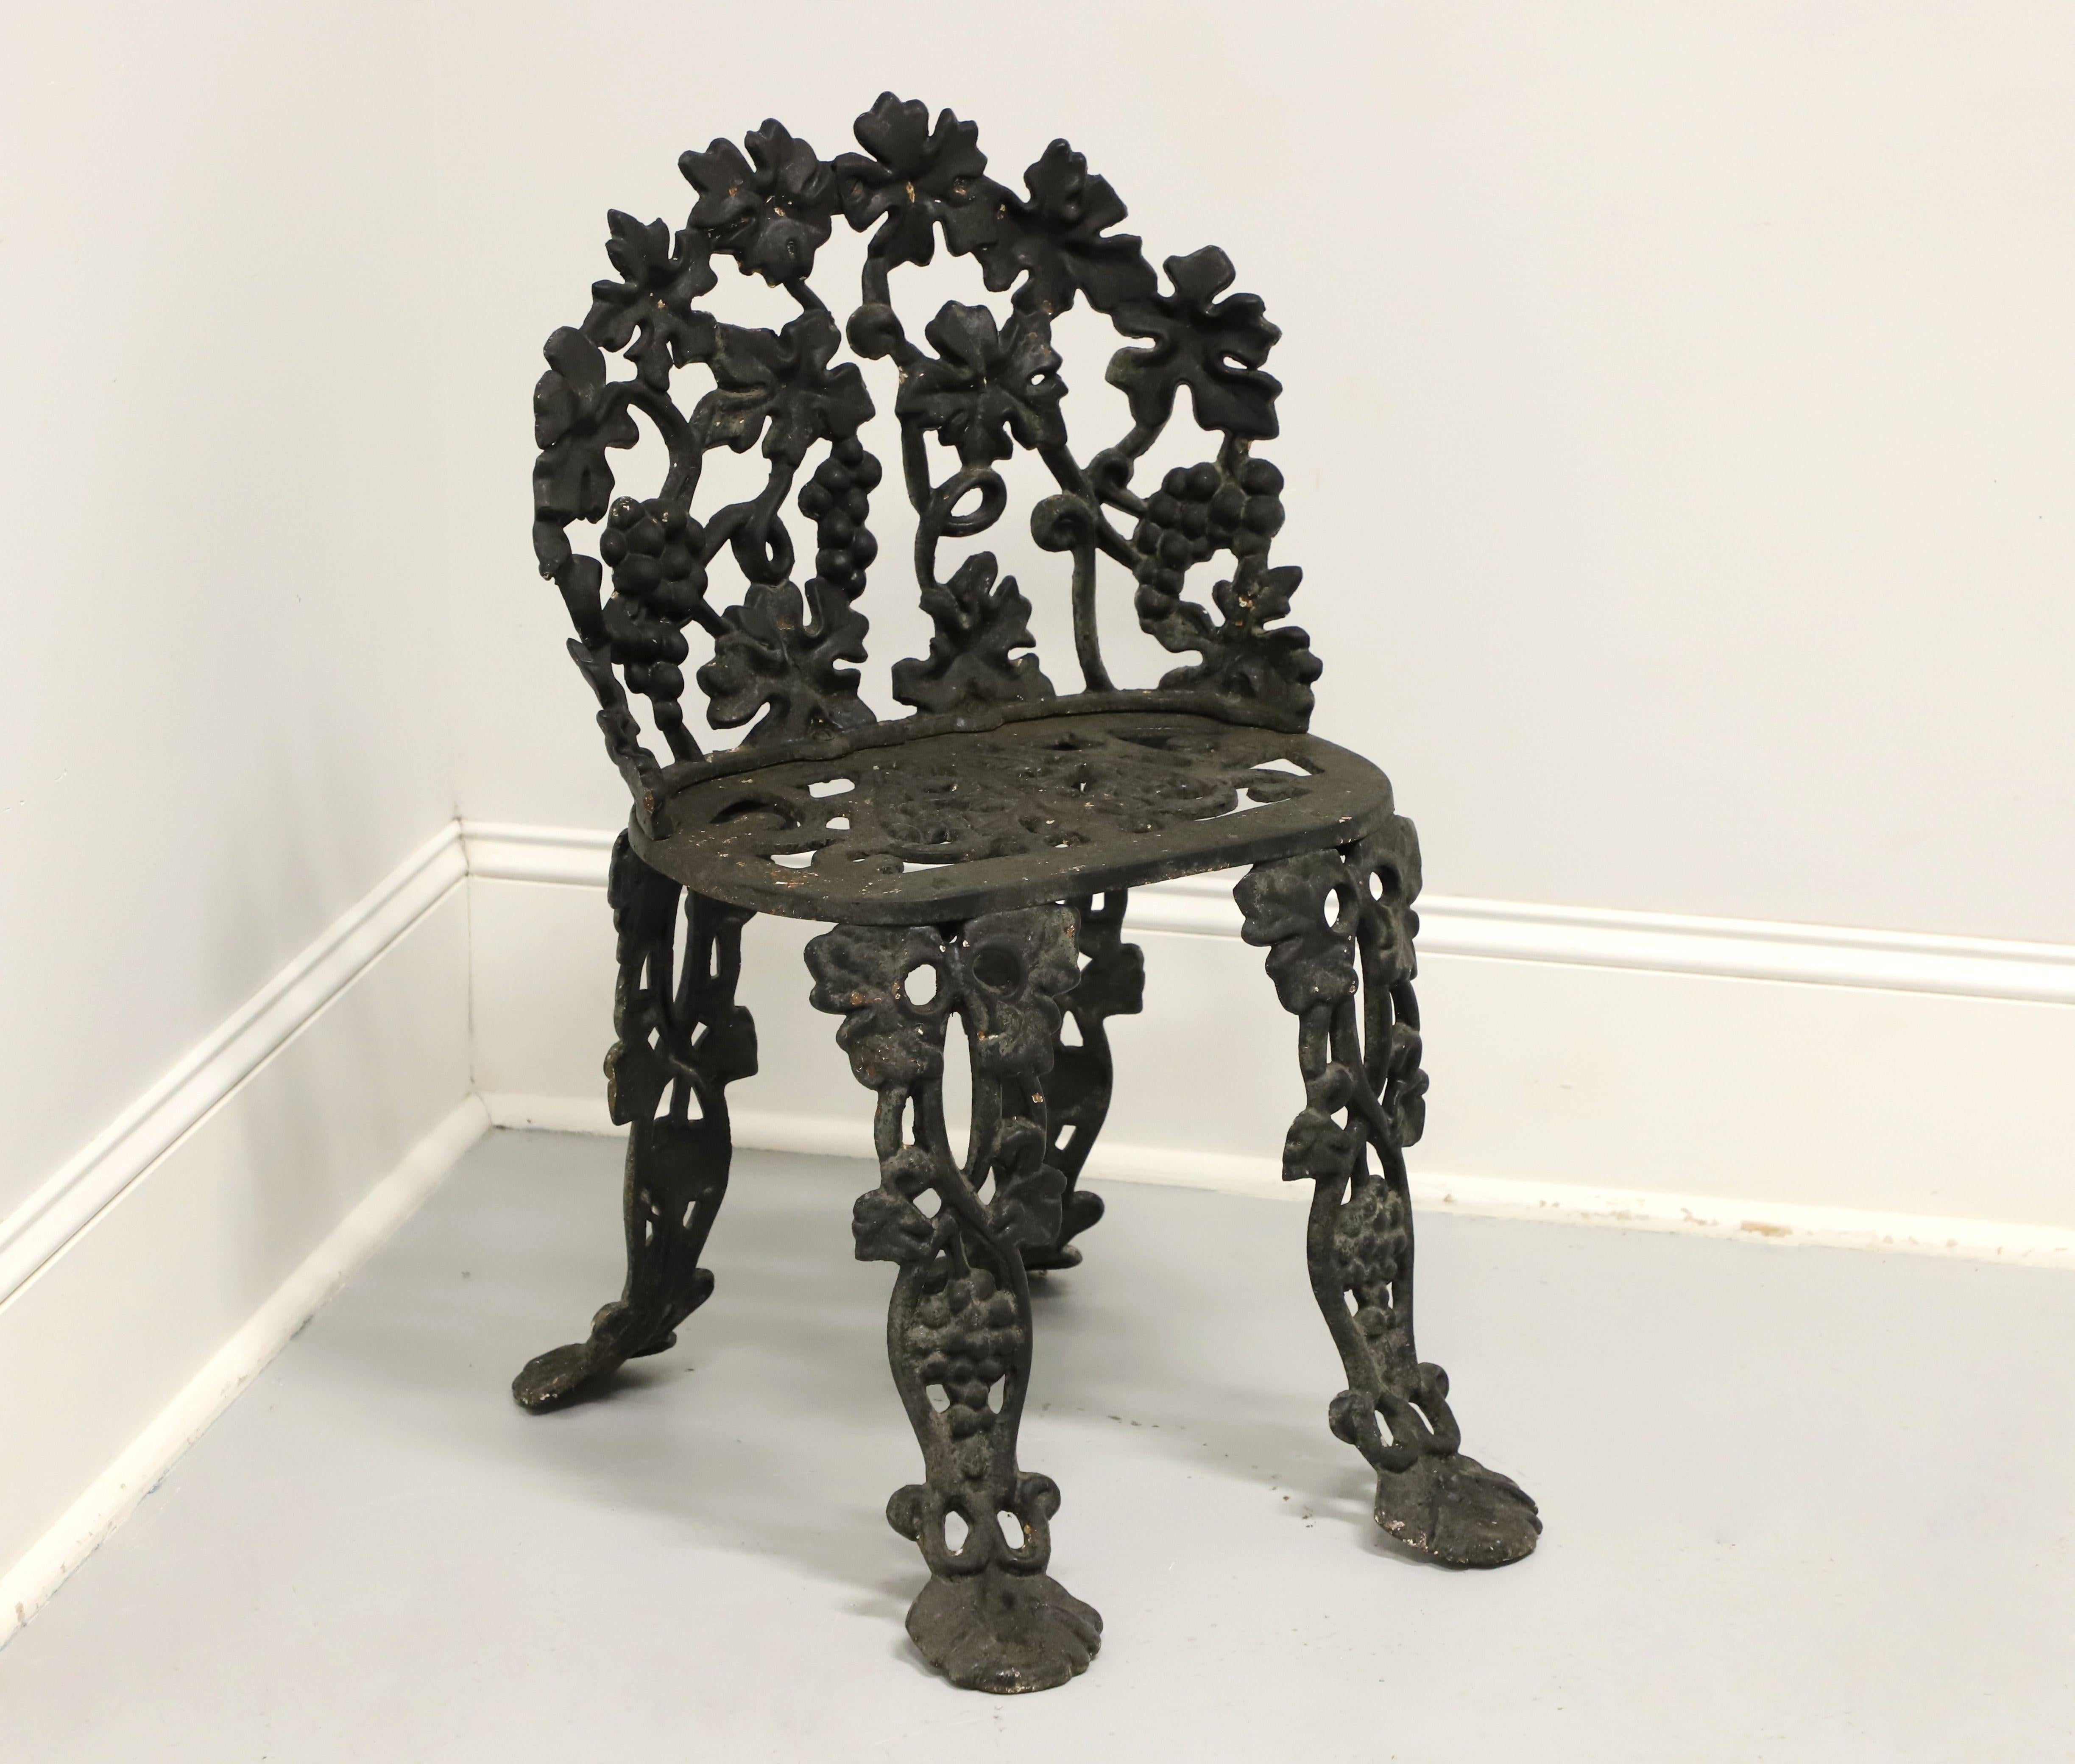 Antique Victorian Cast Iron Grape Leaf Garden Settee, Chairs, Table- 4 Piece Set In Good Condition For Sale In Charlotte, NC